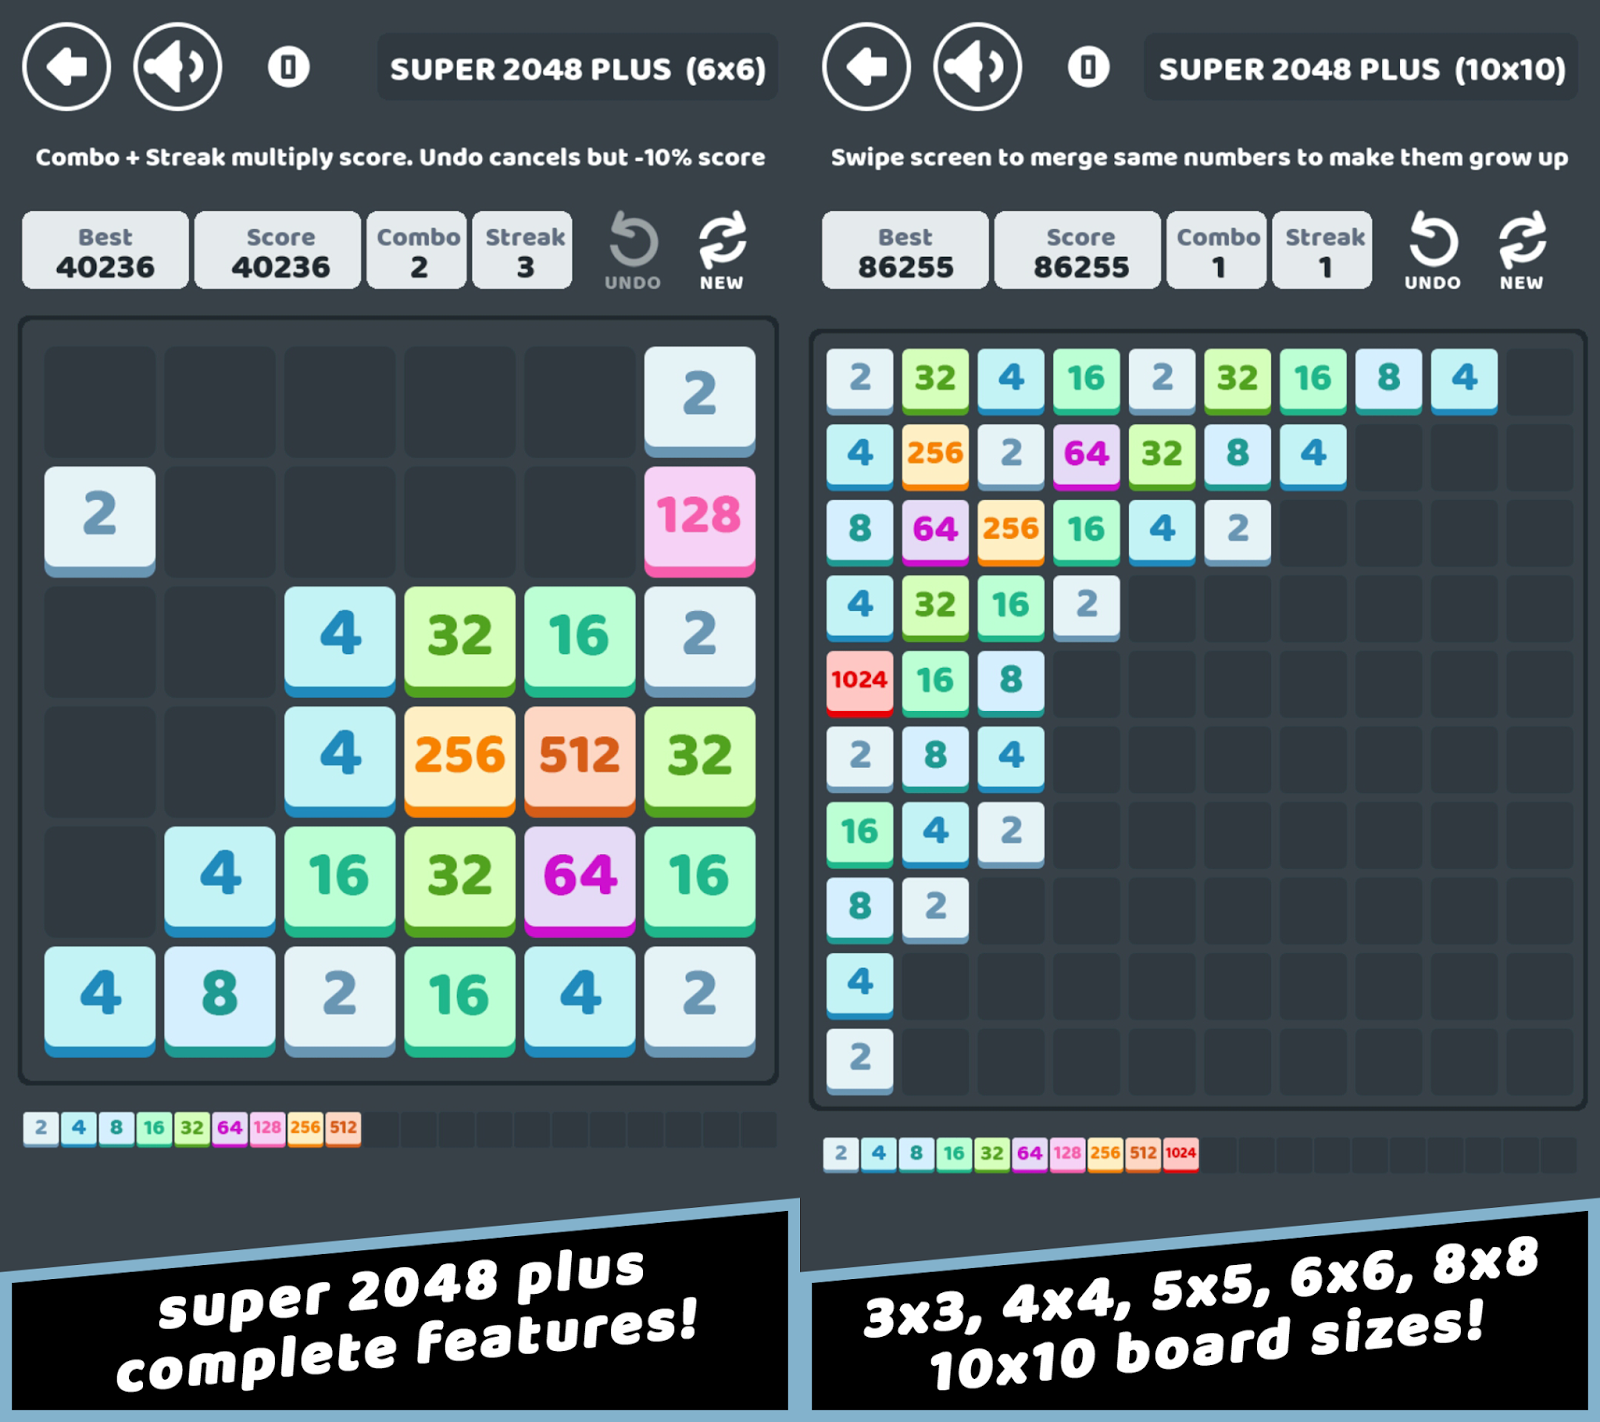 Super 2048 Plus, the most complete 2048 puzzle game ...